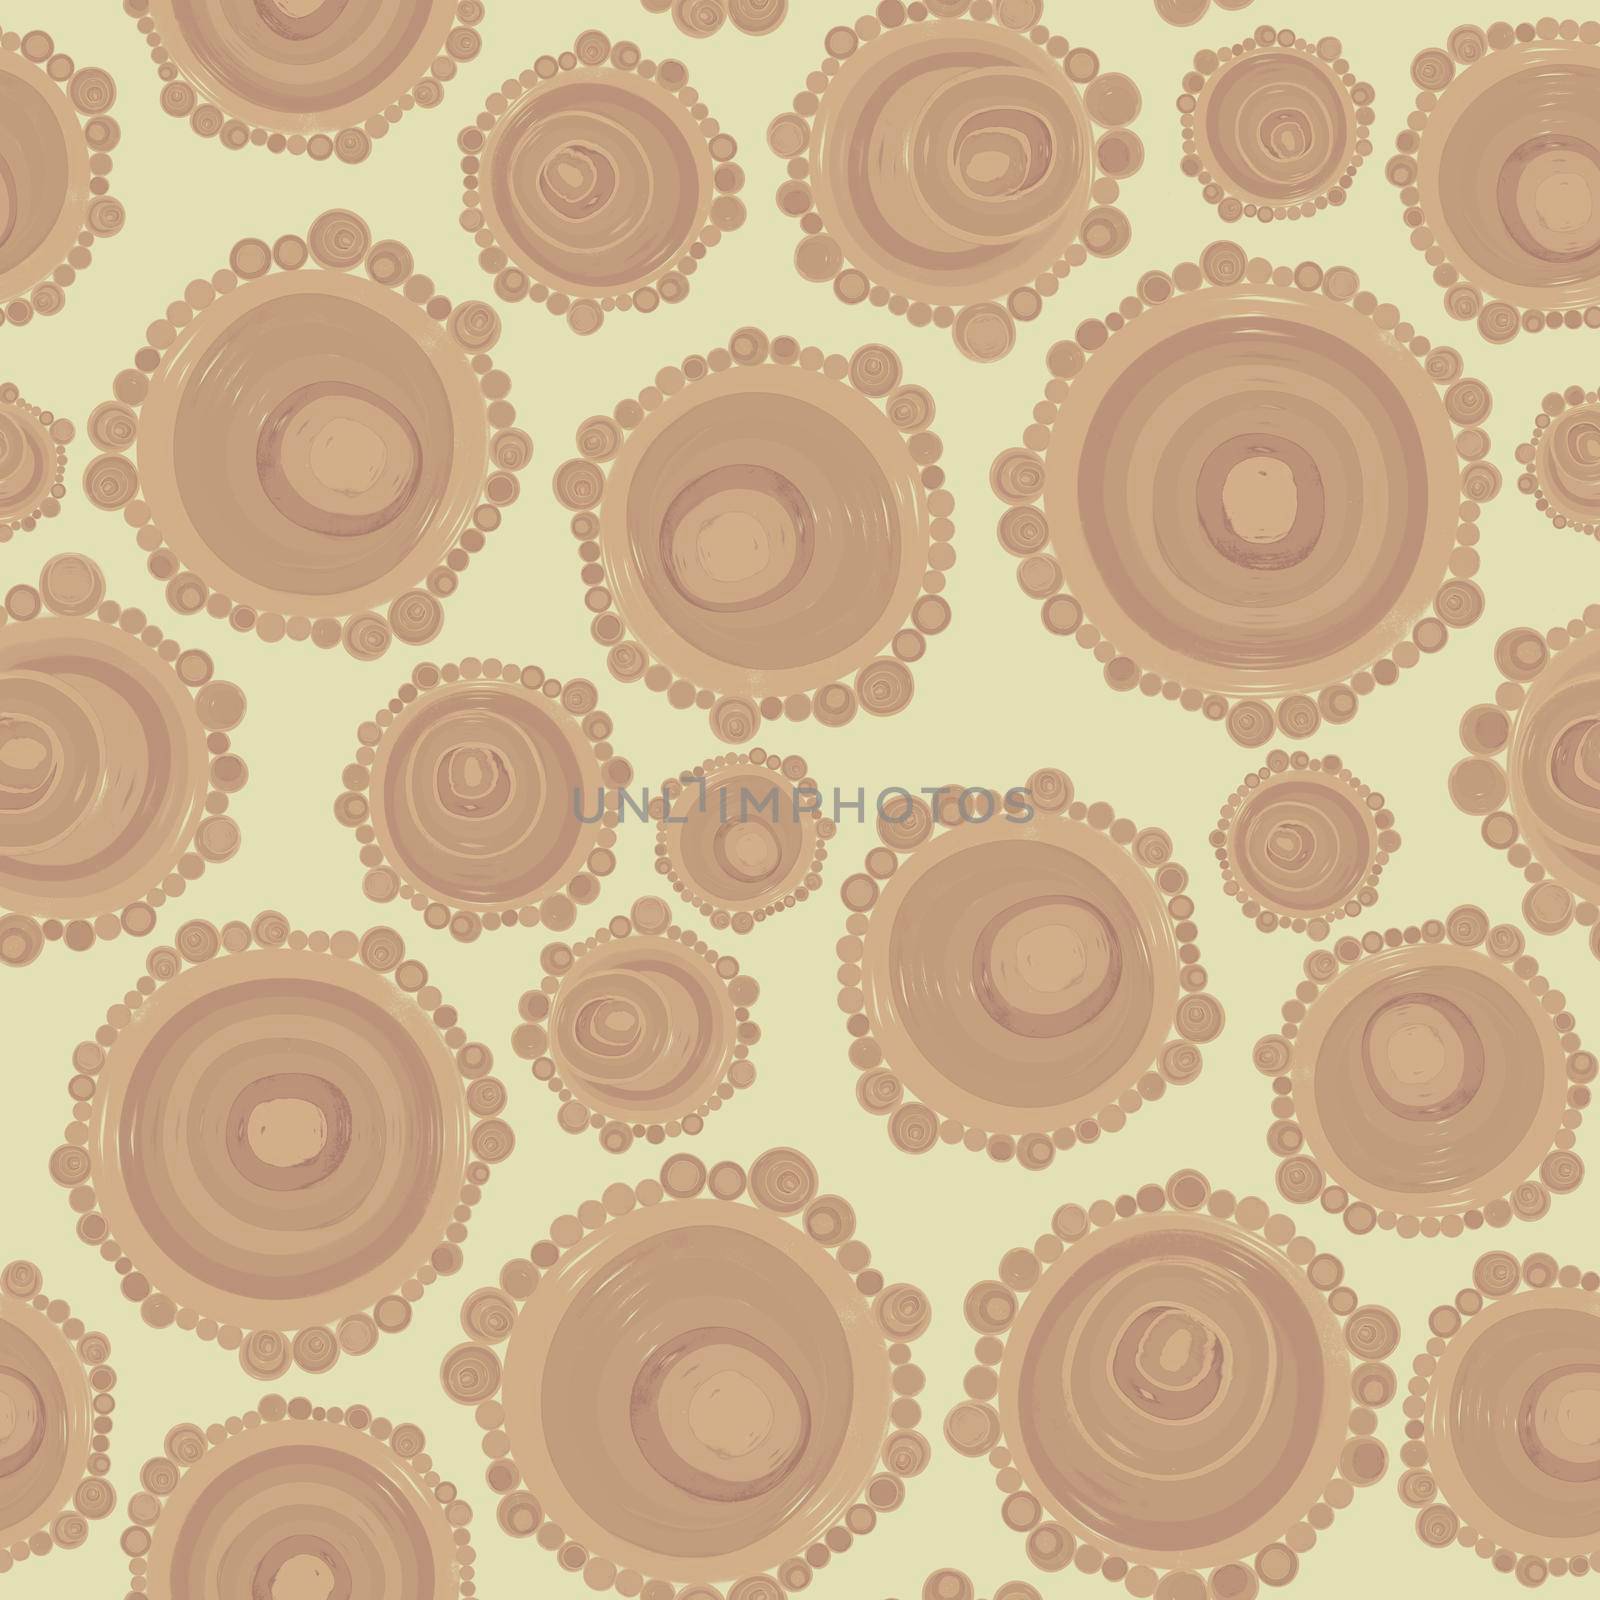 Geometric seamless pattern,texture with perfectly contacting nested circles with different size colors.Repeating pattern with circles filled with dots.For textile,wrapping paper,banner.Pastel shades by Angelsmoon